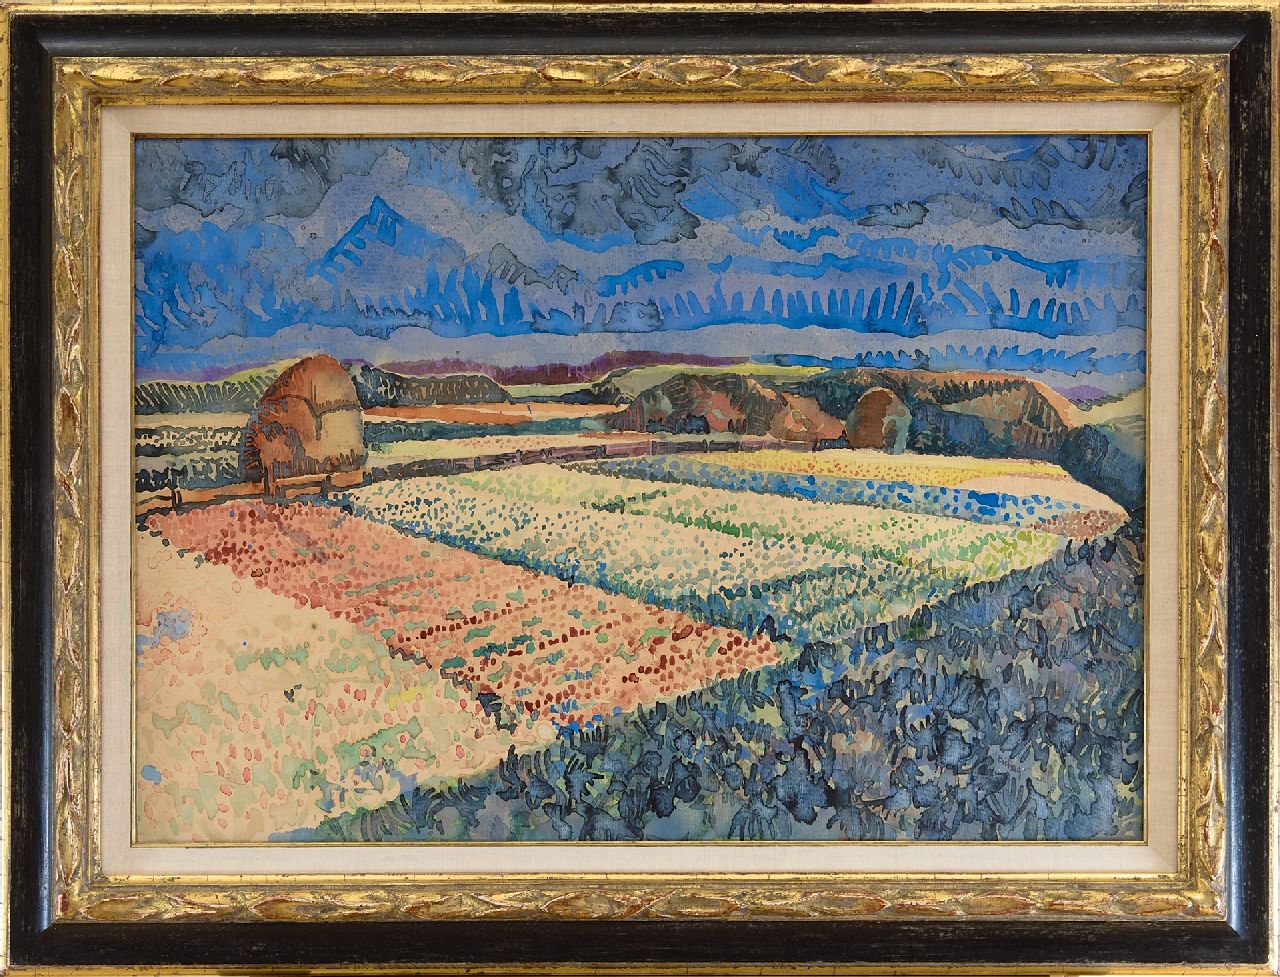 Bieling H.F.  | Hermann Friederich 'Herman' Bieling, Bulb fields, watercolour on paper 47.8 x 68.0 cm, signed l.r. and dated '26